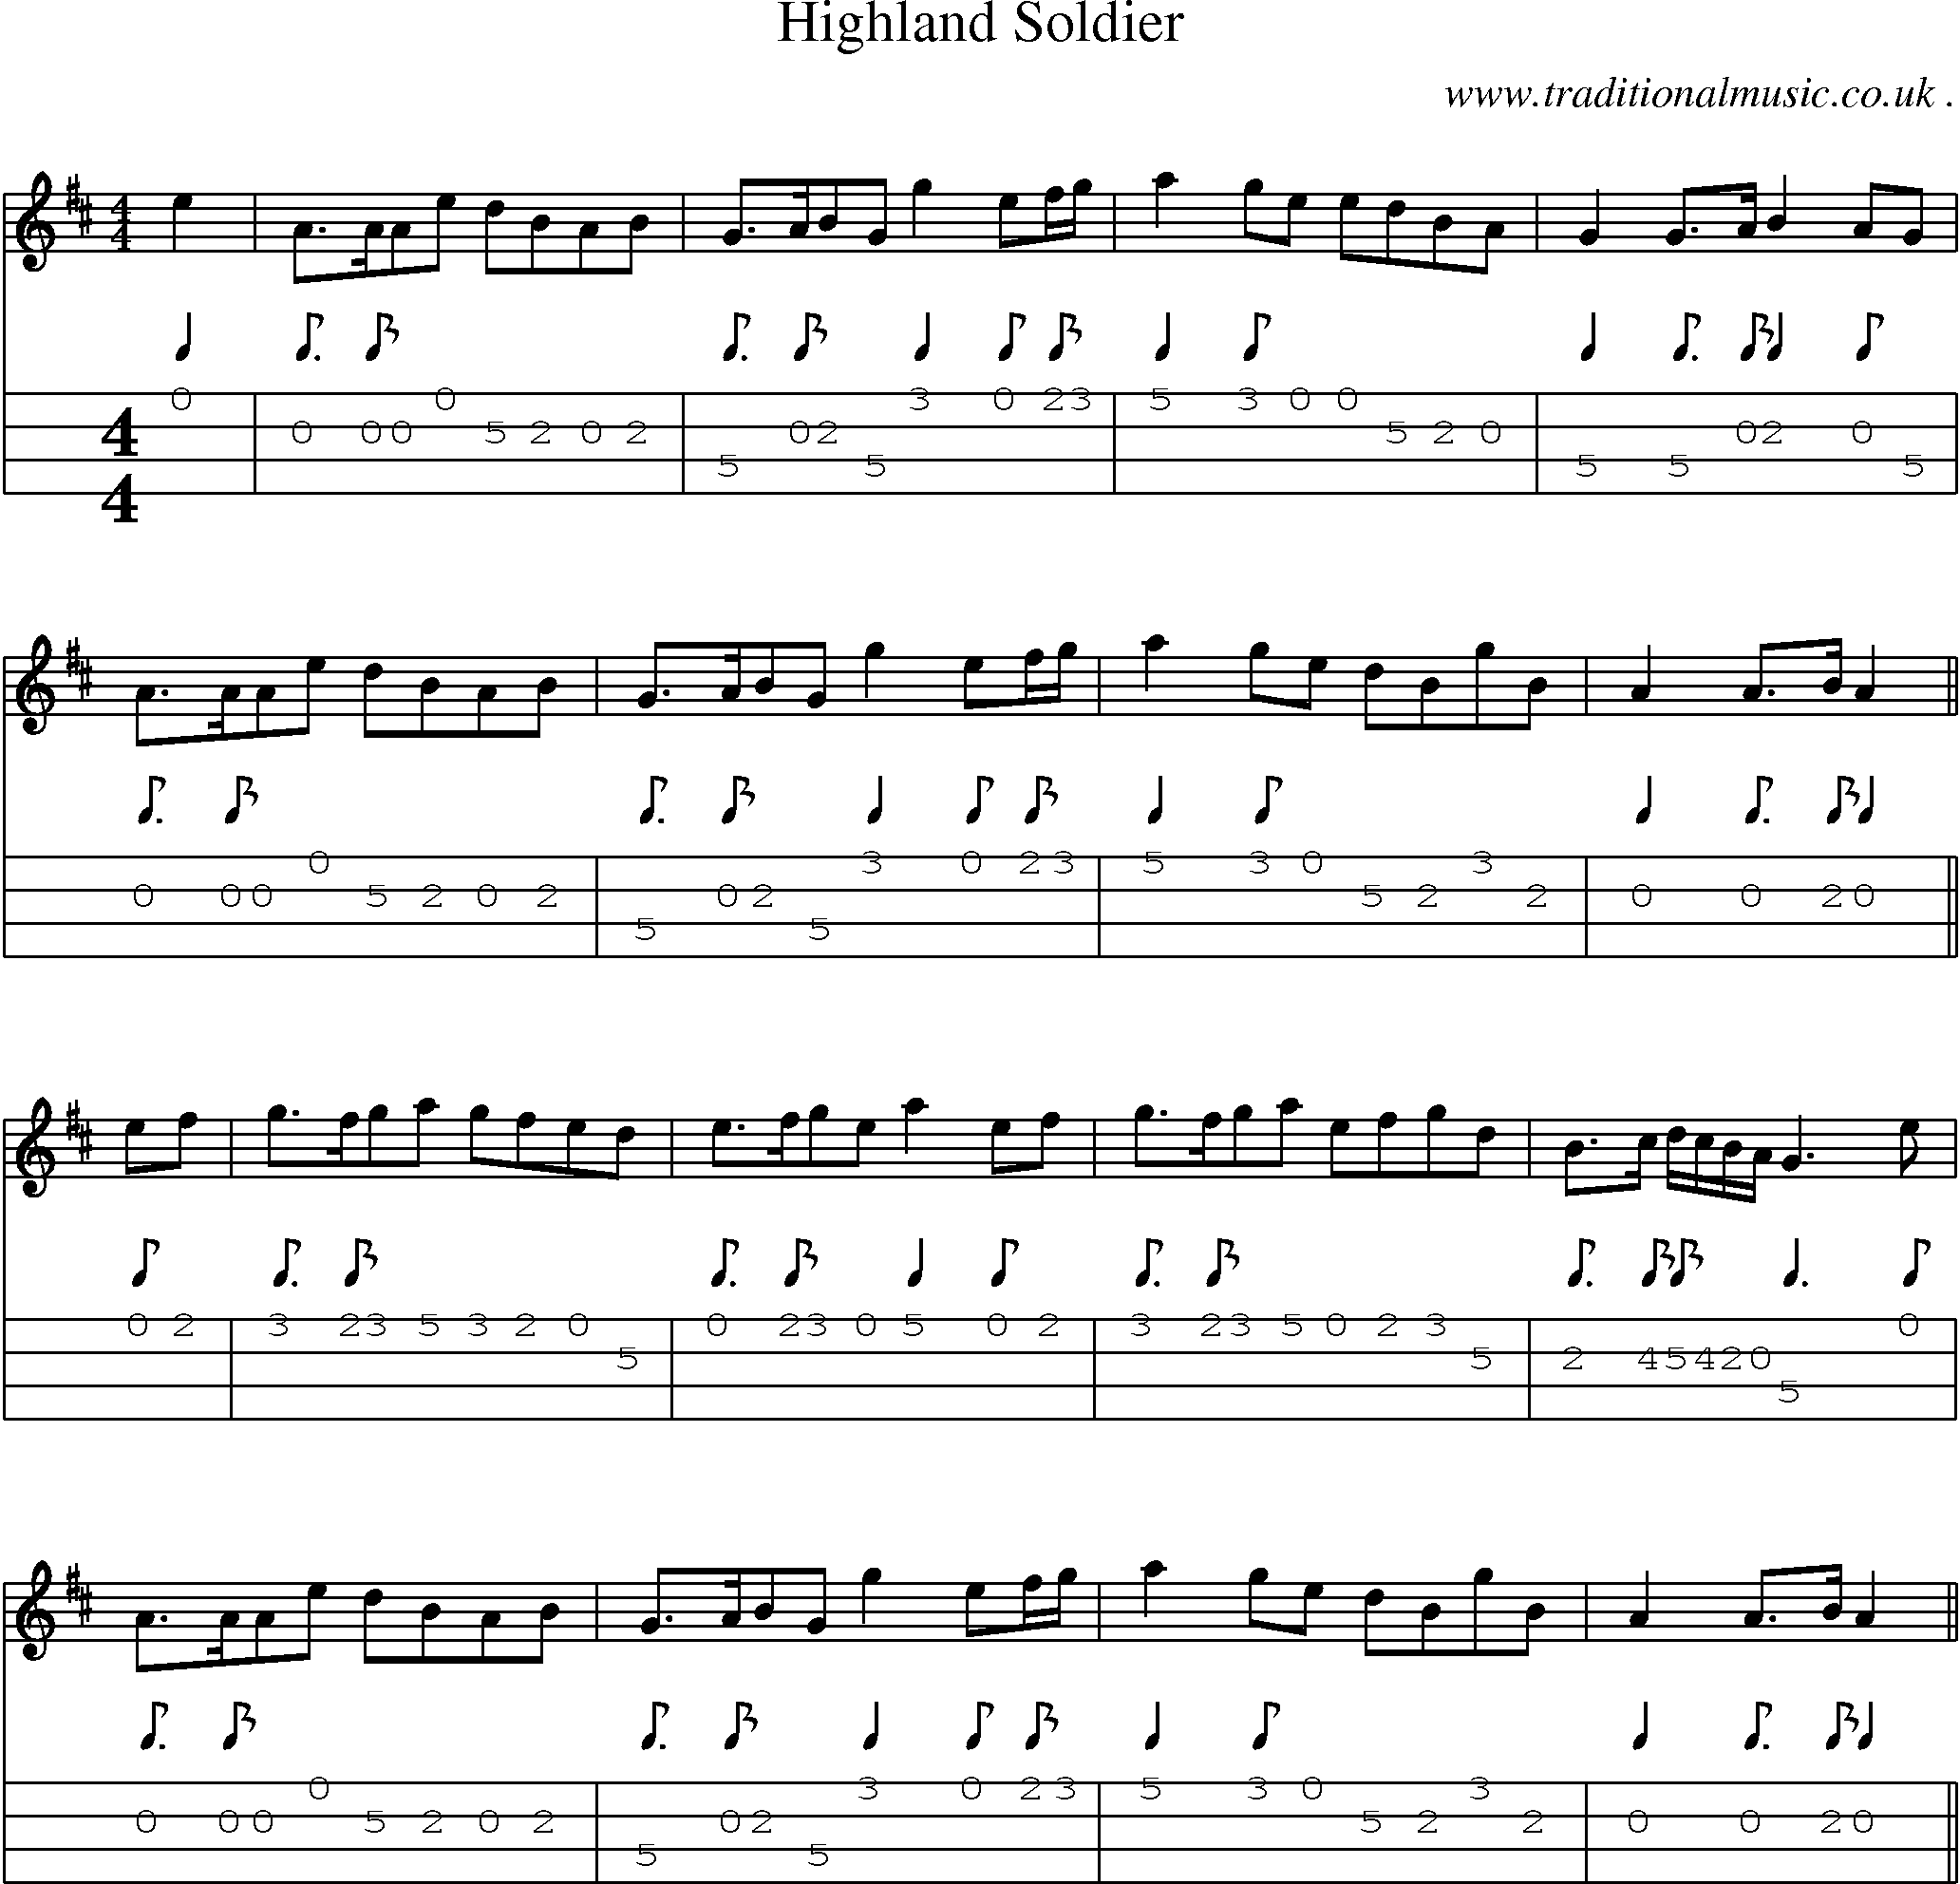 Sheet-music  score, Chords and Mandolin Tabs for Highland Soldier